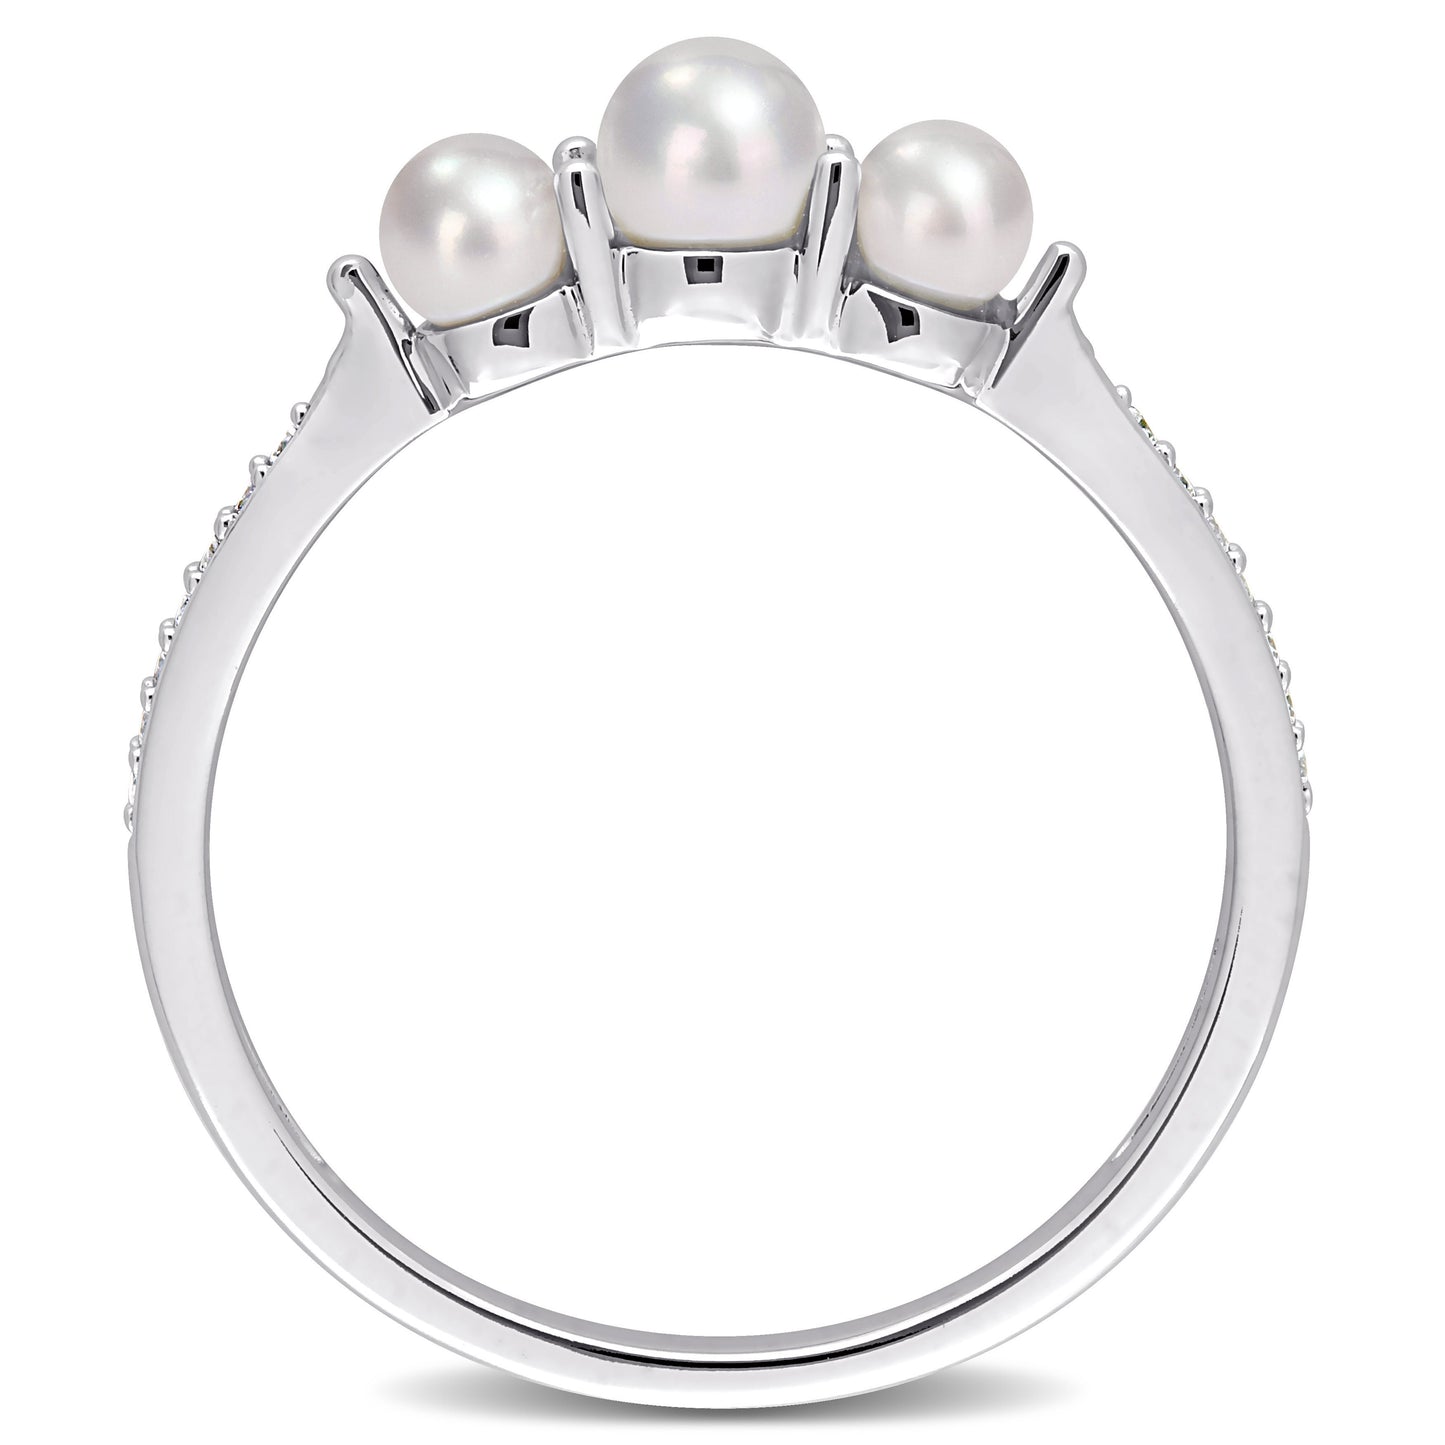 3-Pearl with Diamond Accents Ring in 14k White Gold